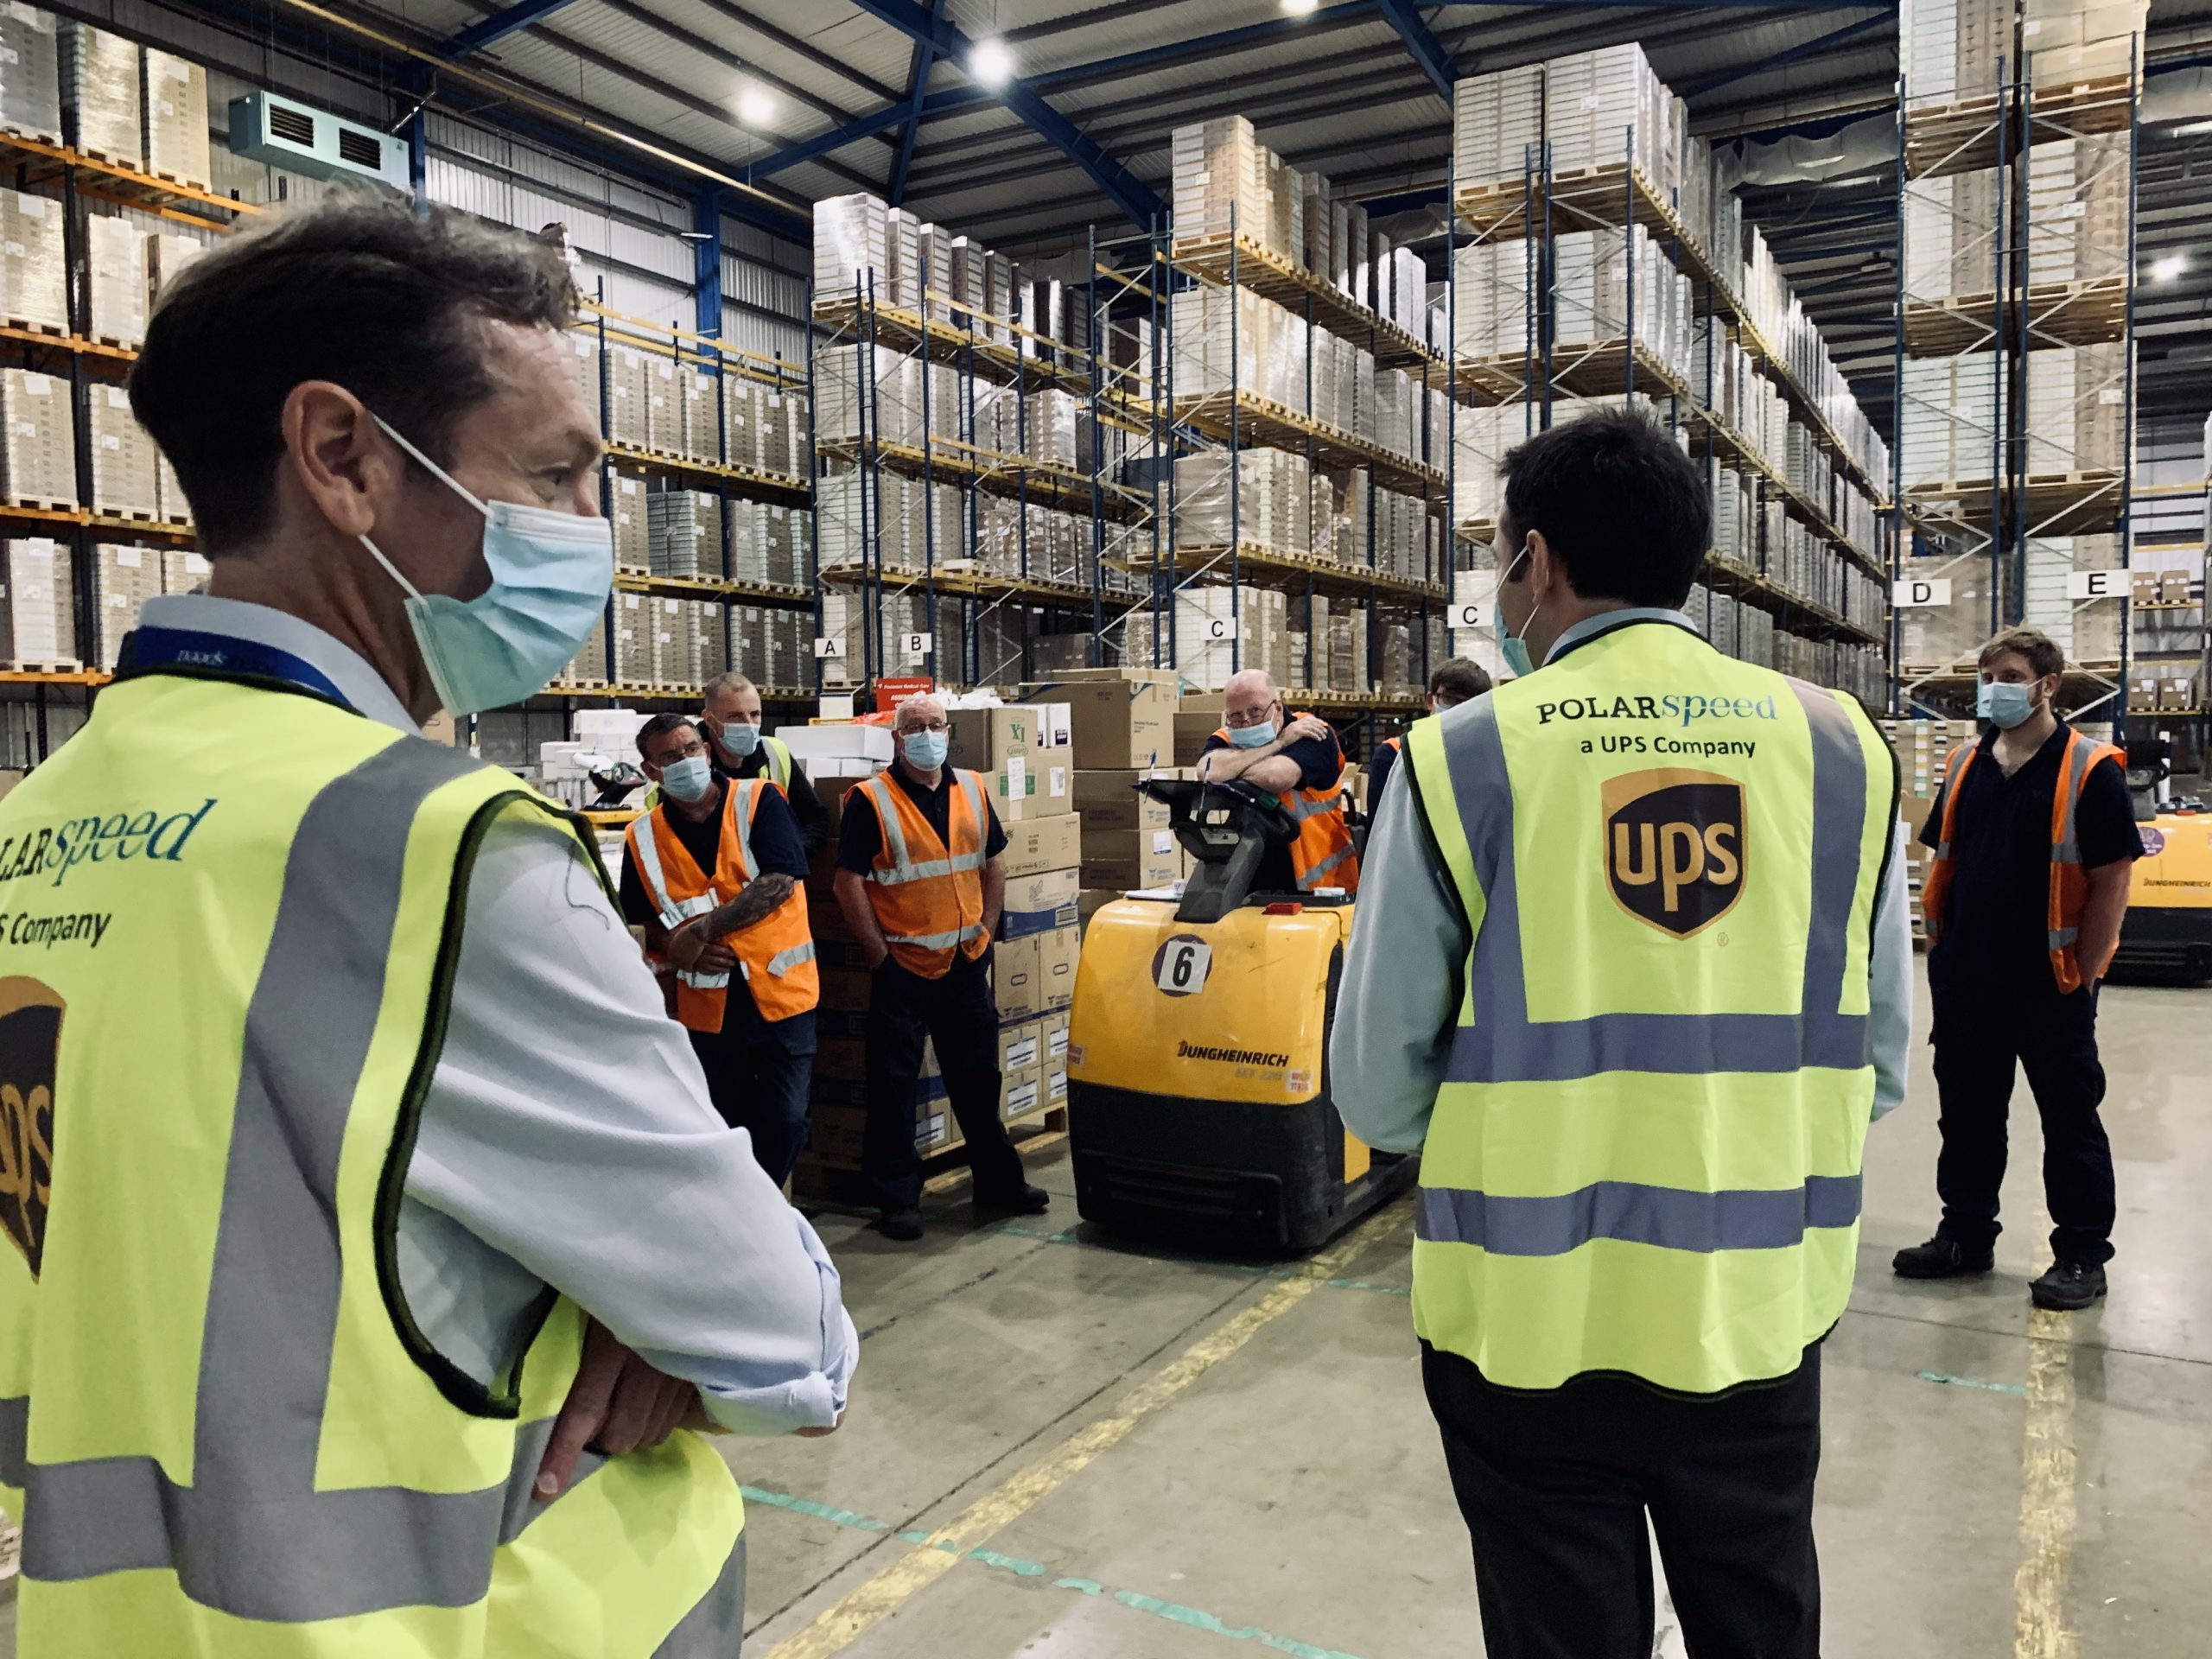 In the foreground we see two men wearing office attire and hi-vis vests, a UPS logo can be seen on the back of the vest. In the background we see a number of warehouse and logistics workers.